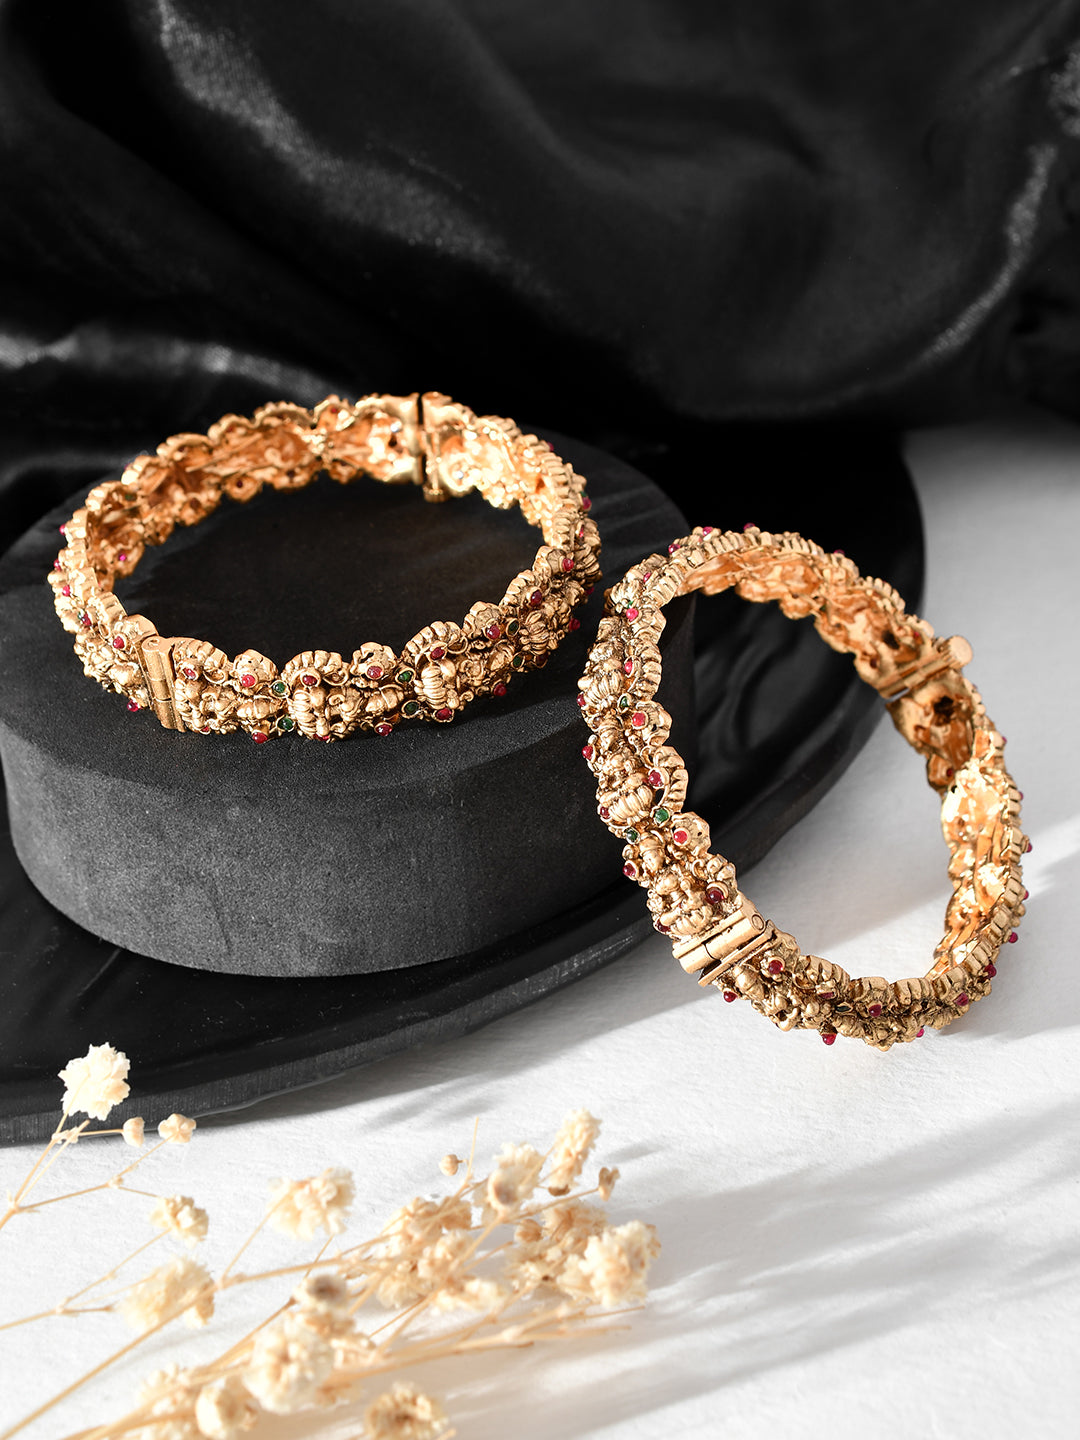 Elevate your style with our South Indian Traditional Temple Bangle Style Gold Plated Bracelet for women. Expertly crafted with stunning details, this bracelet is the perfect accessory for any attire. Made from high-quality materials, it is built to last and add a touch of elegance to your look.